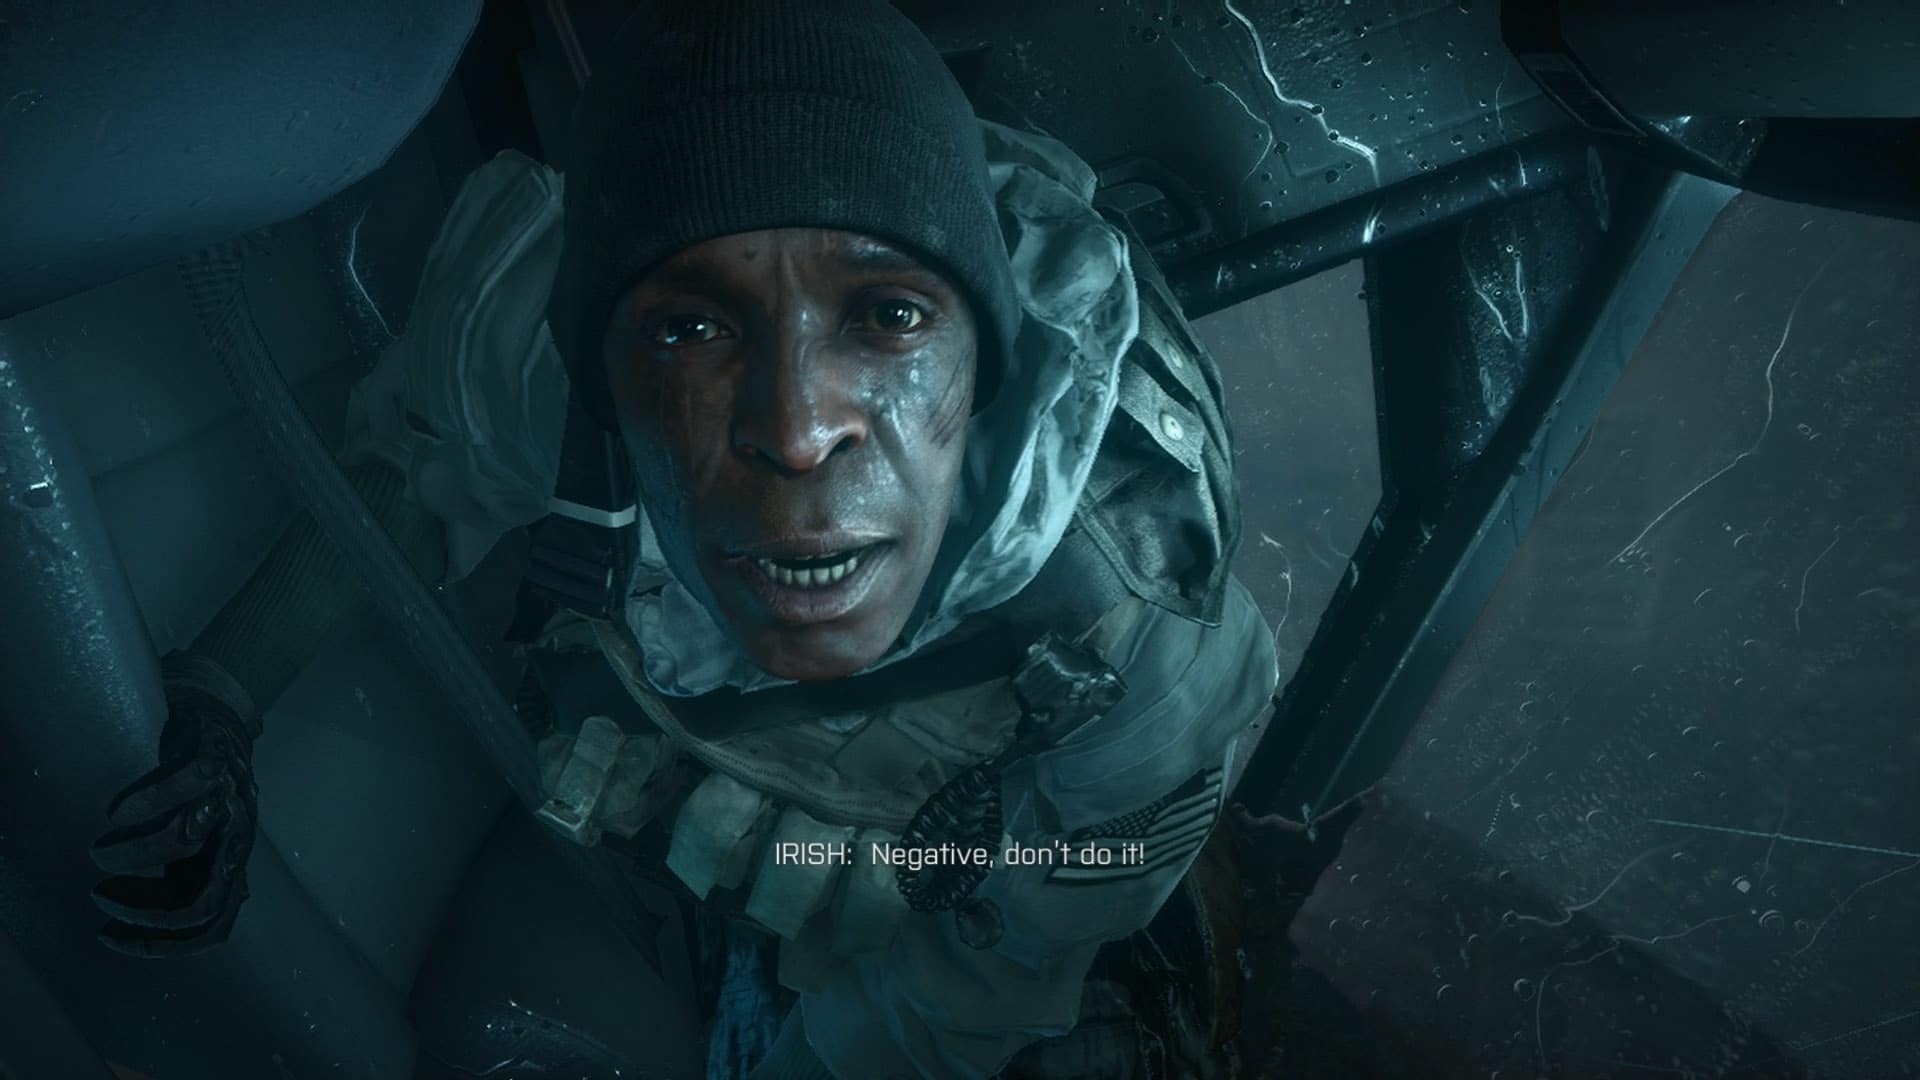 In Battlefield 4, Irish was much younger. But now he's fighting for a cause he truly believes in.